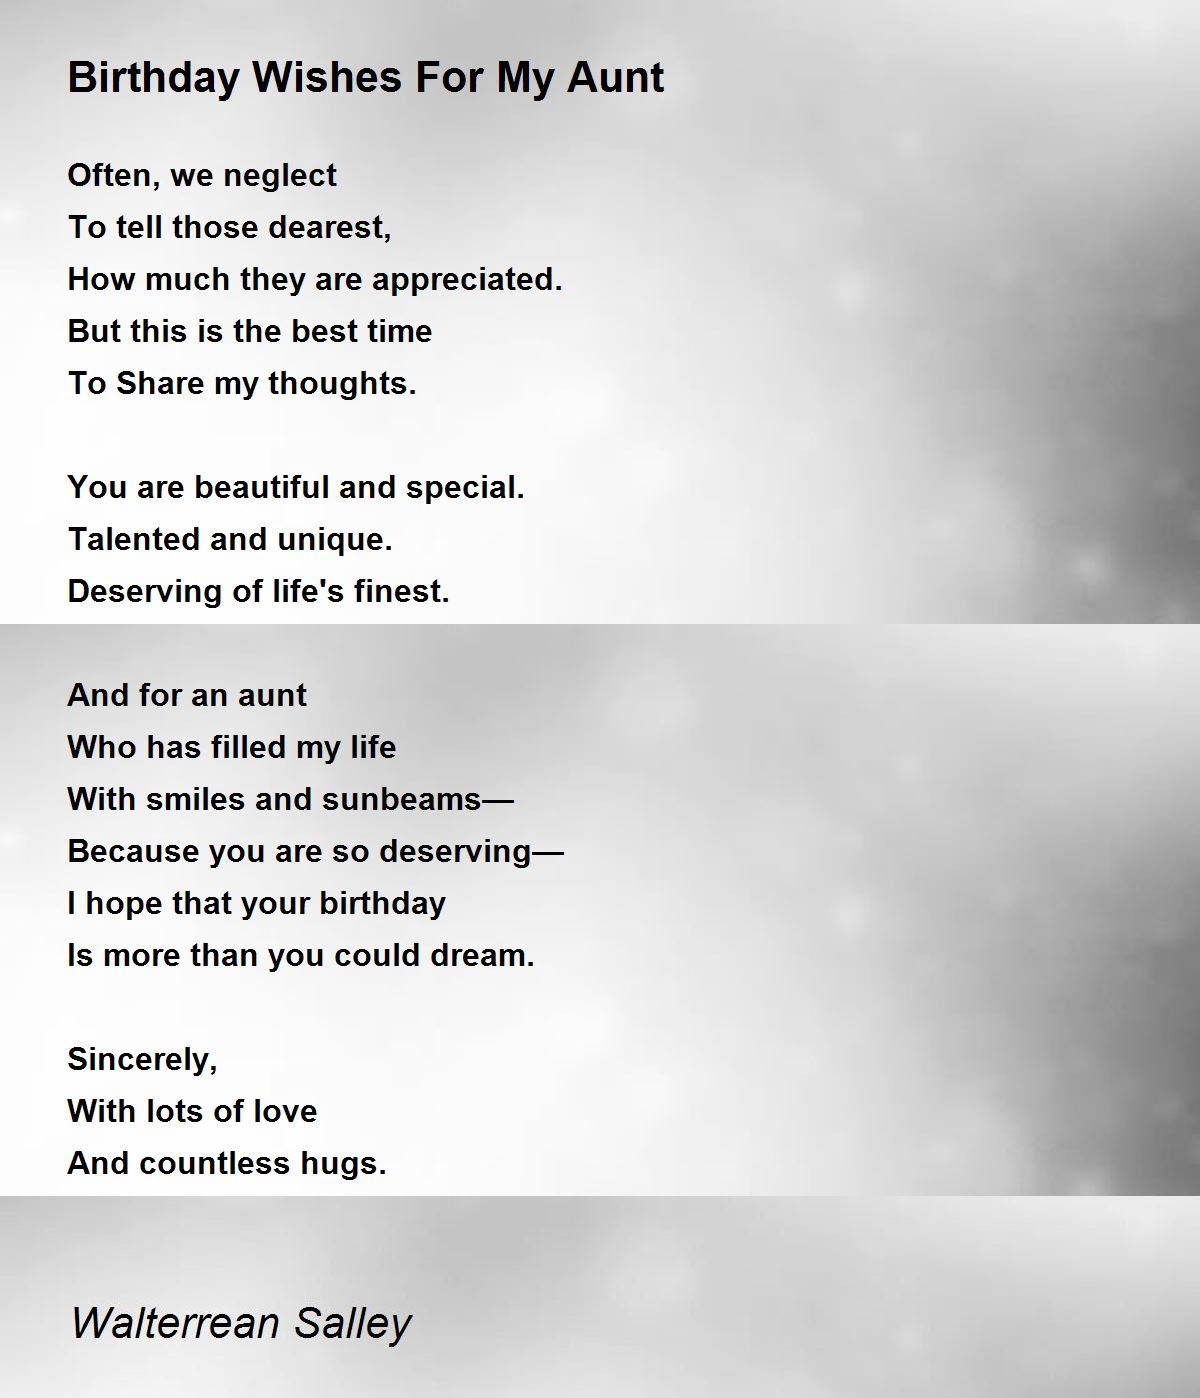 Birthday Wishes For My Aunt Poem By